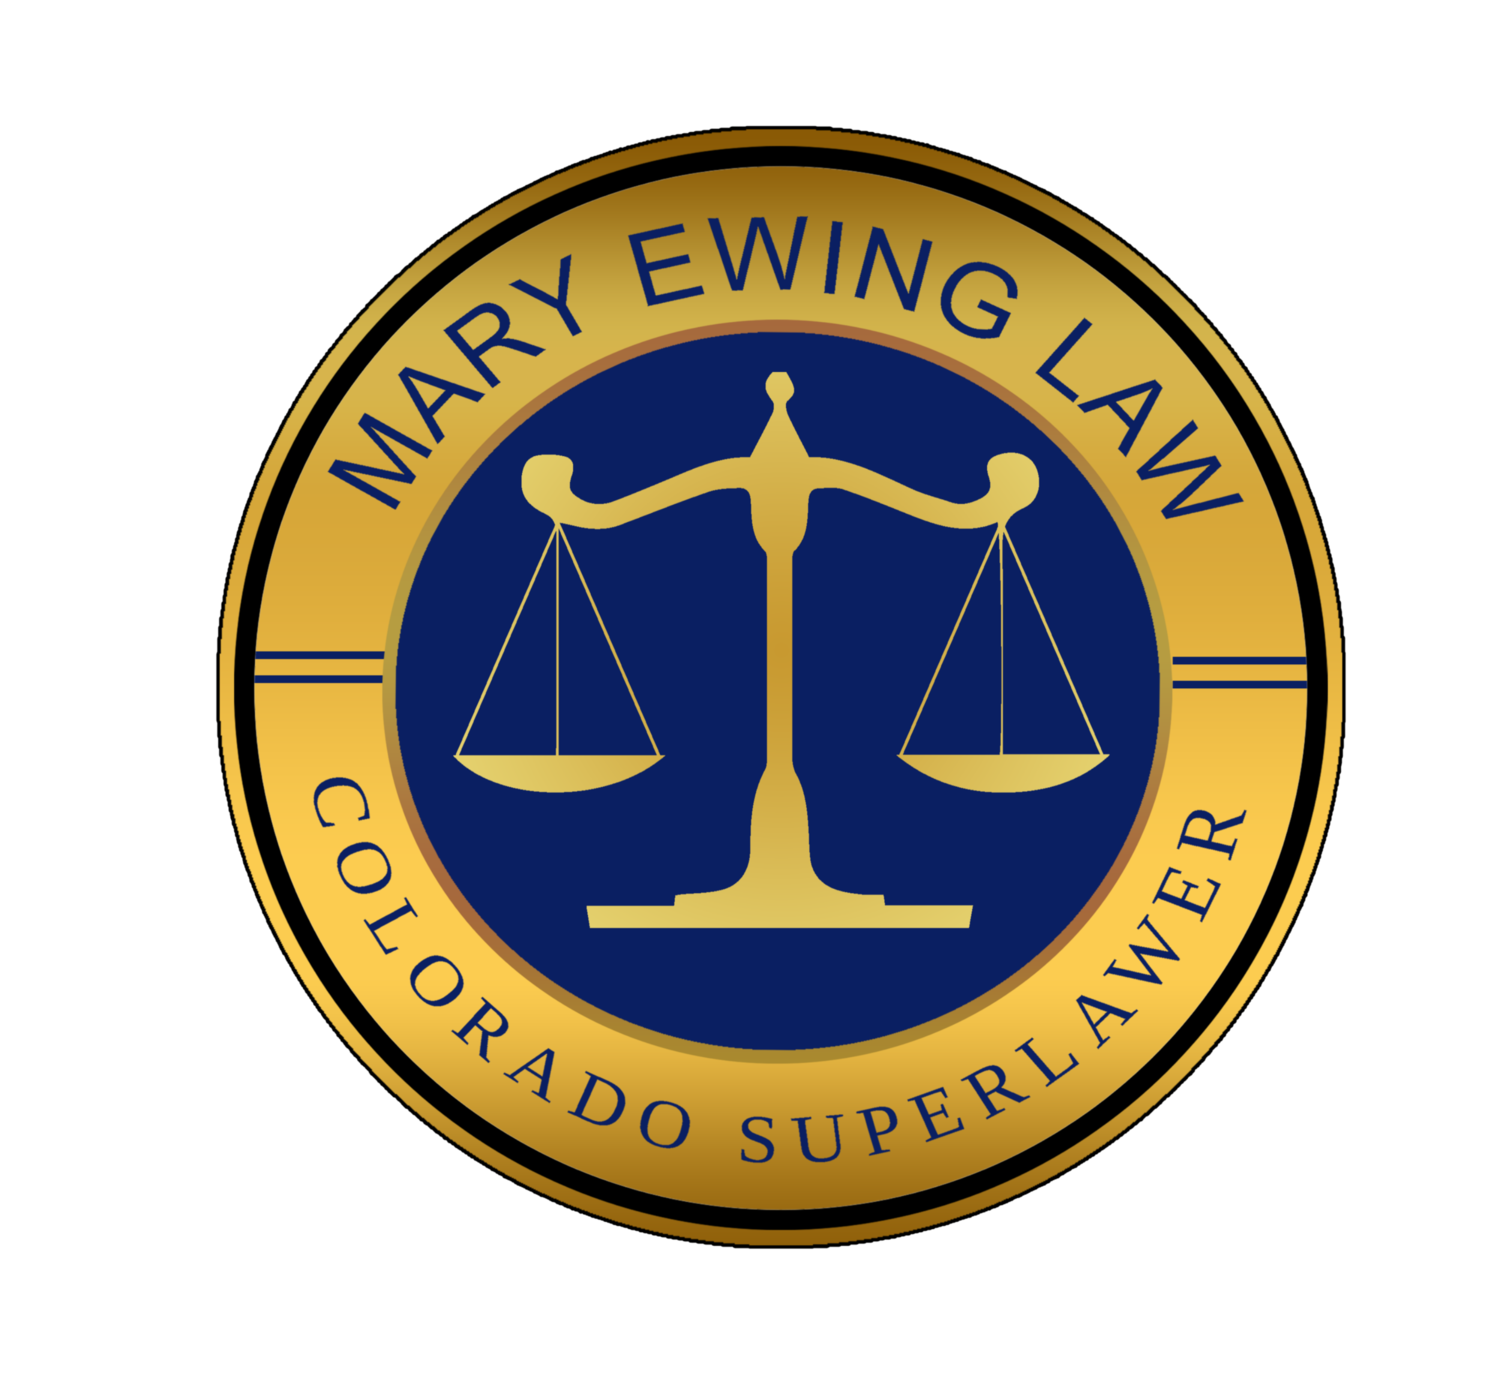 Mary Ewing Law